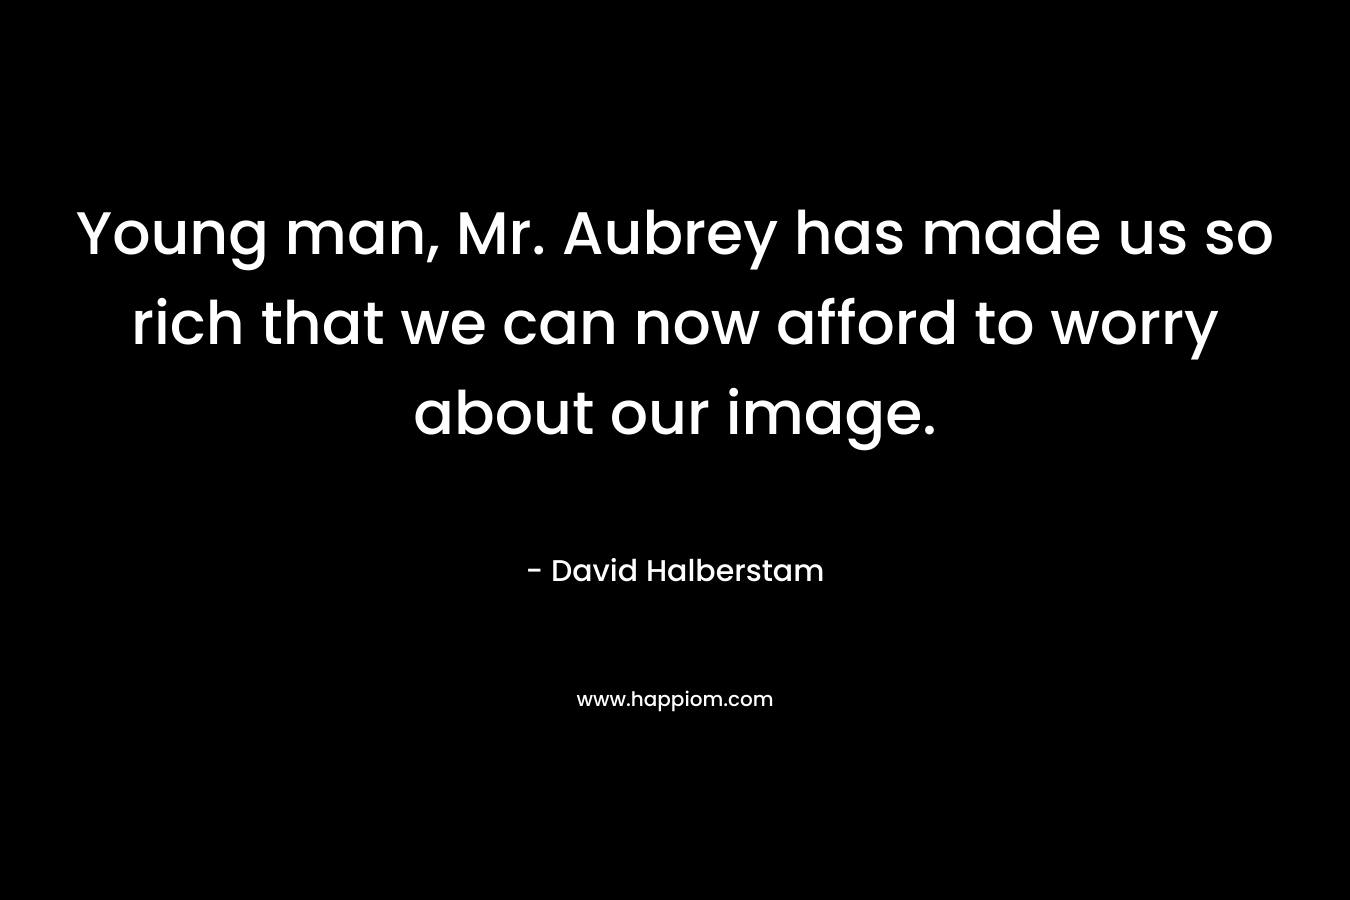 Young man, Mr. Aubrey has made us so rich that we can now afford to worry about our image. – David Halberstam